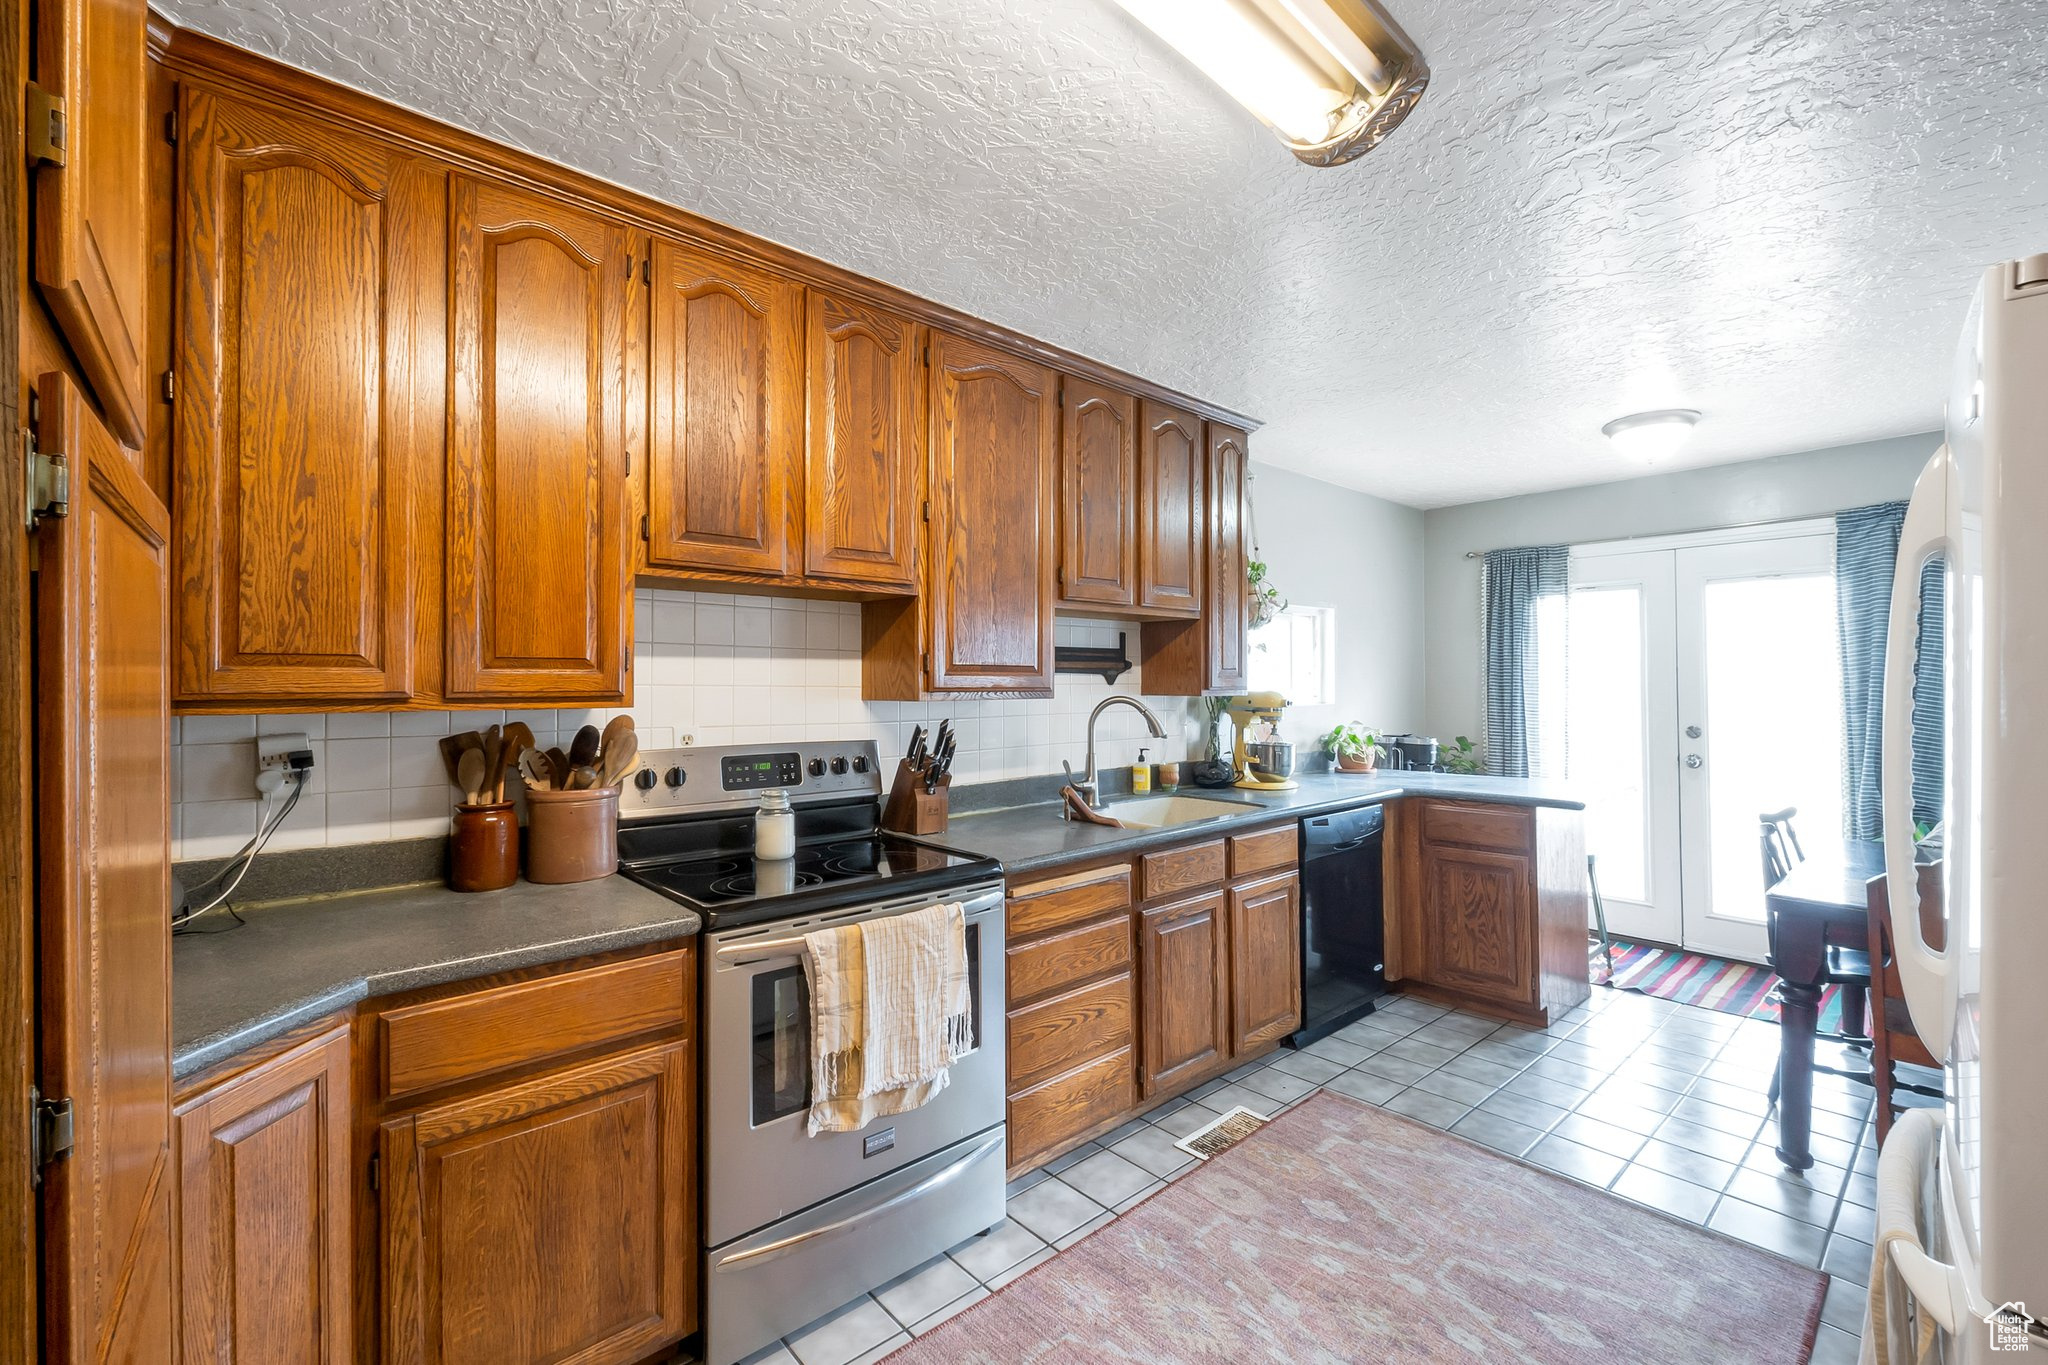 Lots of storage in this kitchen with oak cabinets and neutral tile. Range, dishwasher and refrigerator included.